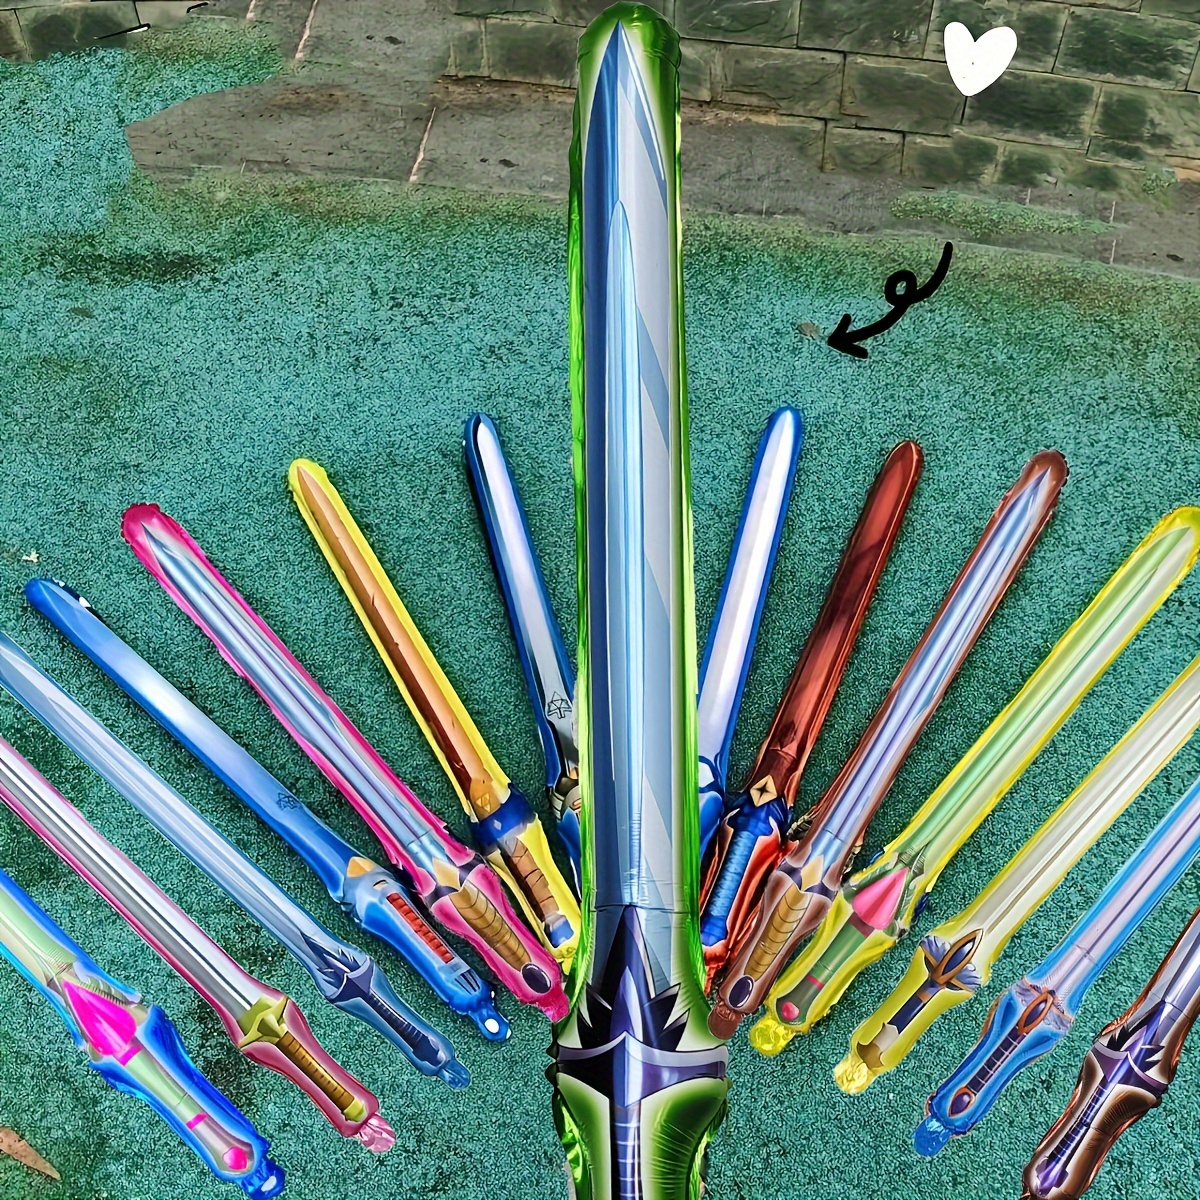 

8pcs Birthday Party Sword Balloon Decoration - Perfect For School Celebrations, Cheer Sticks & Festive Fun! Christmas, Halloween, Thanksgiving Day Gift Easter Gift